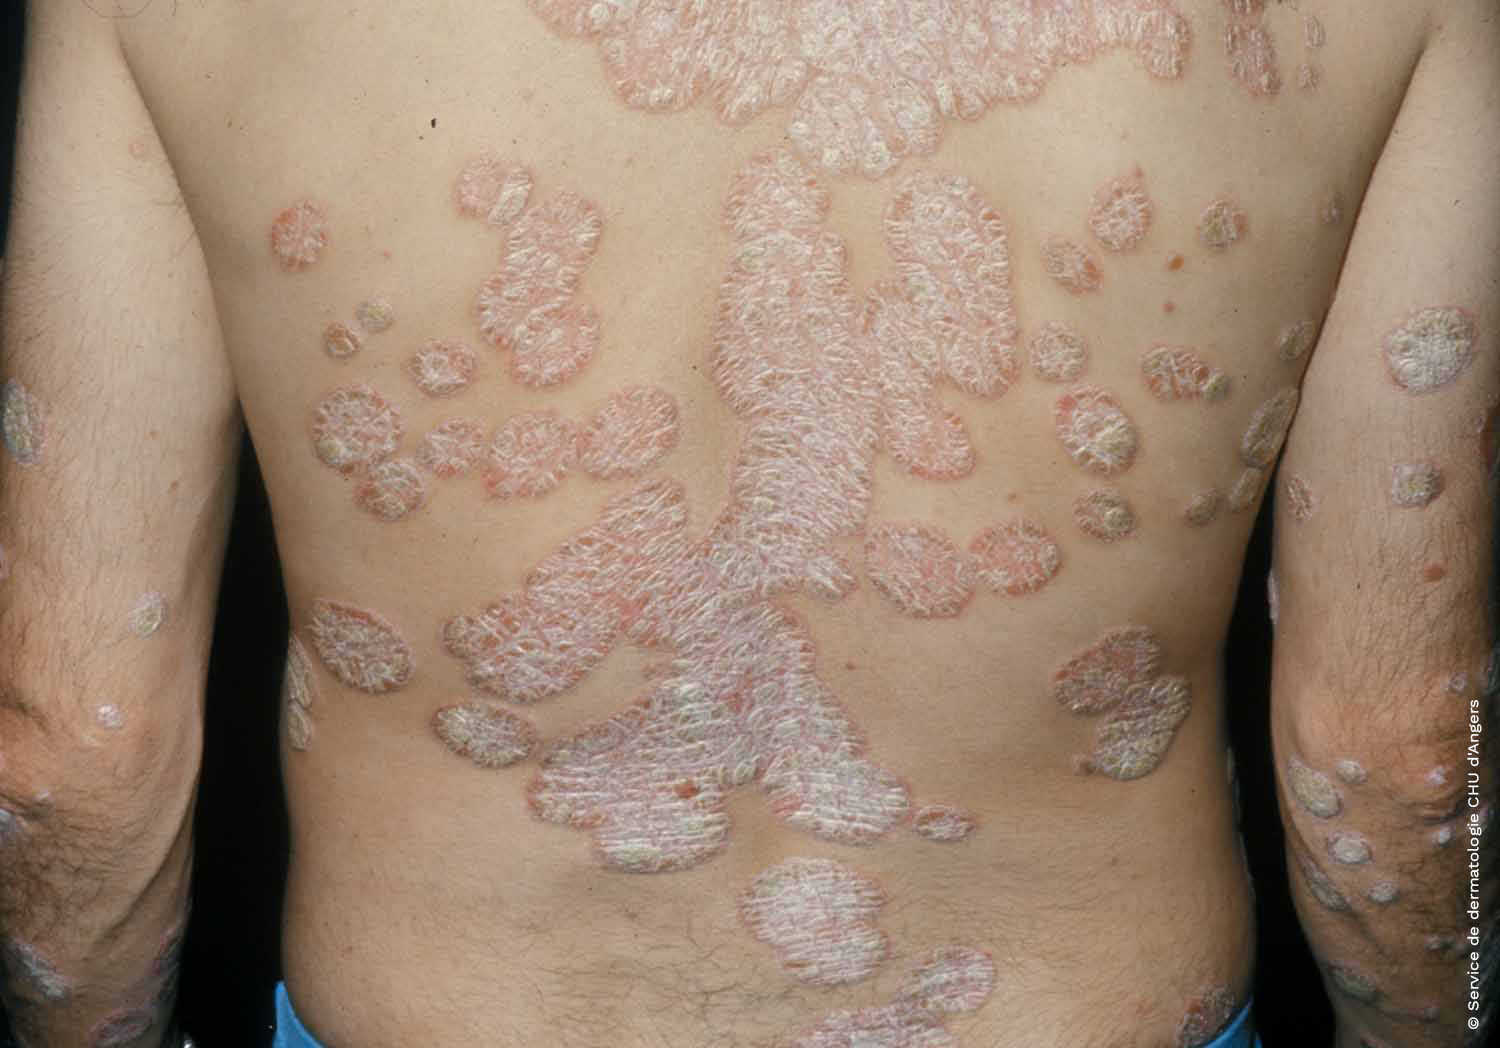 Plaque psoriasis of the back